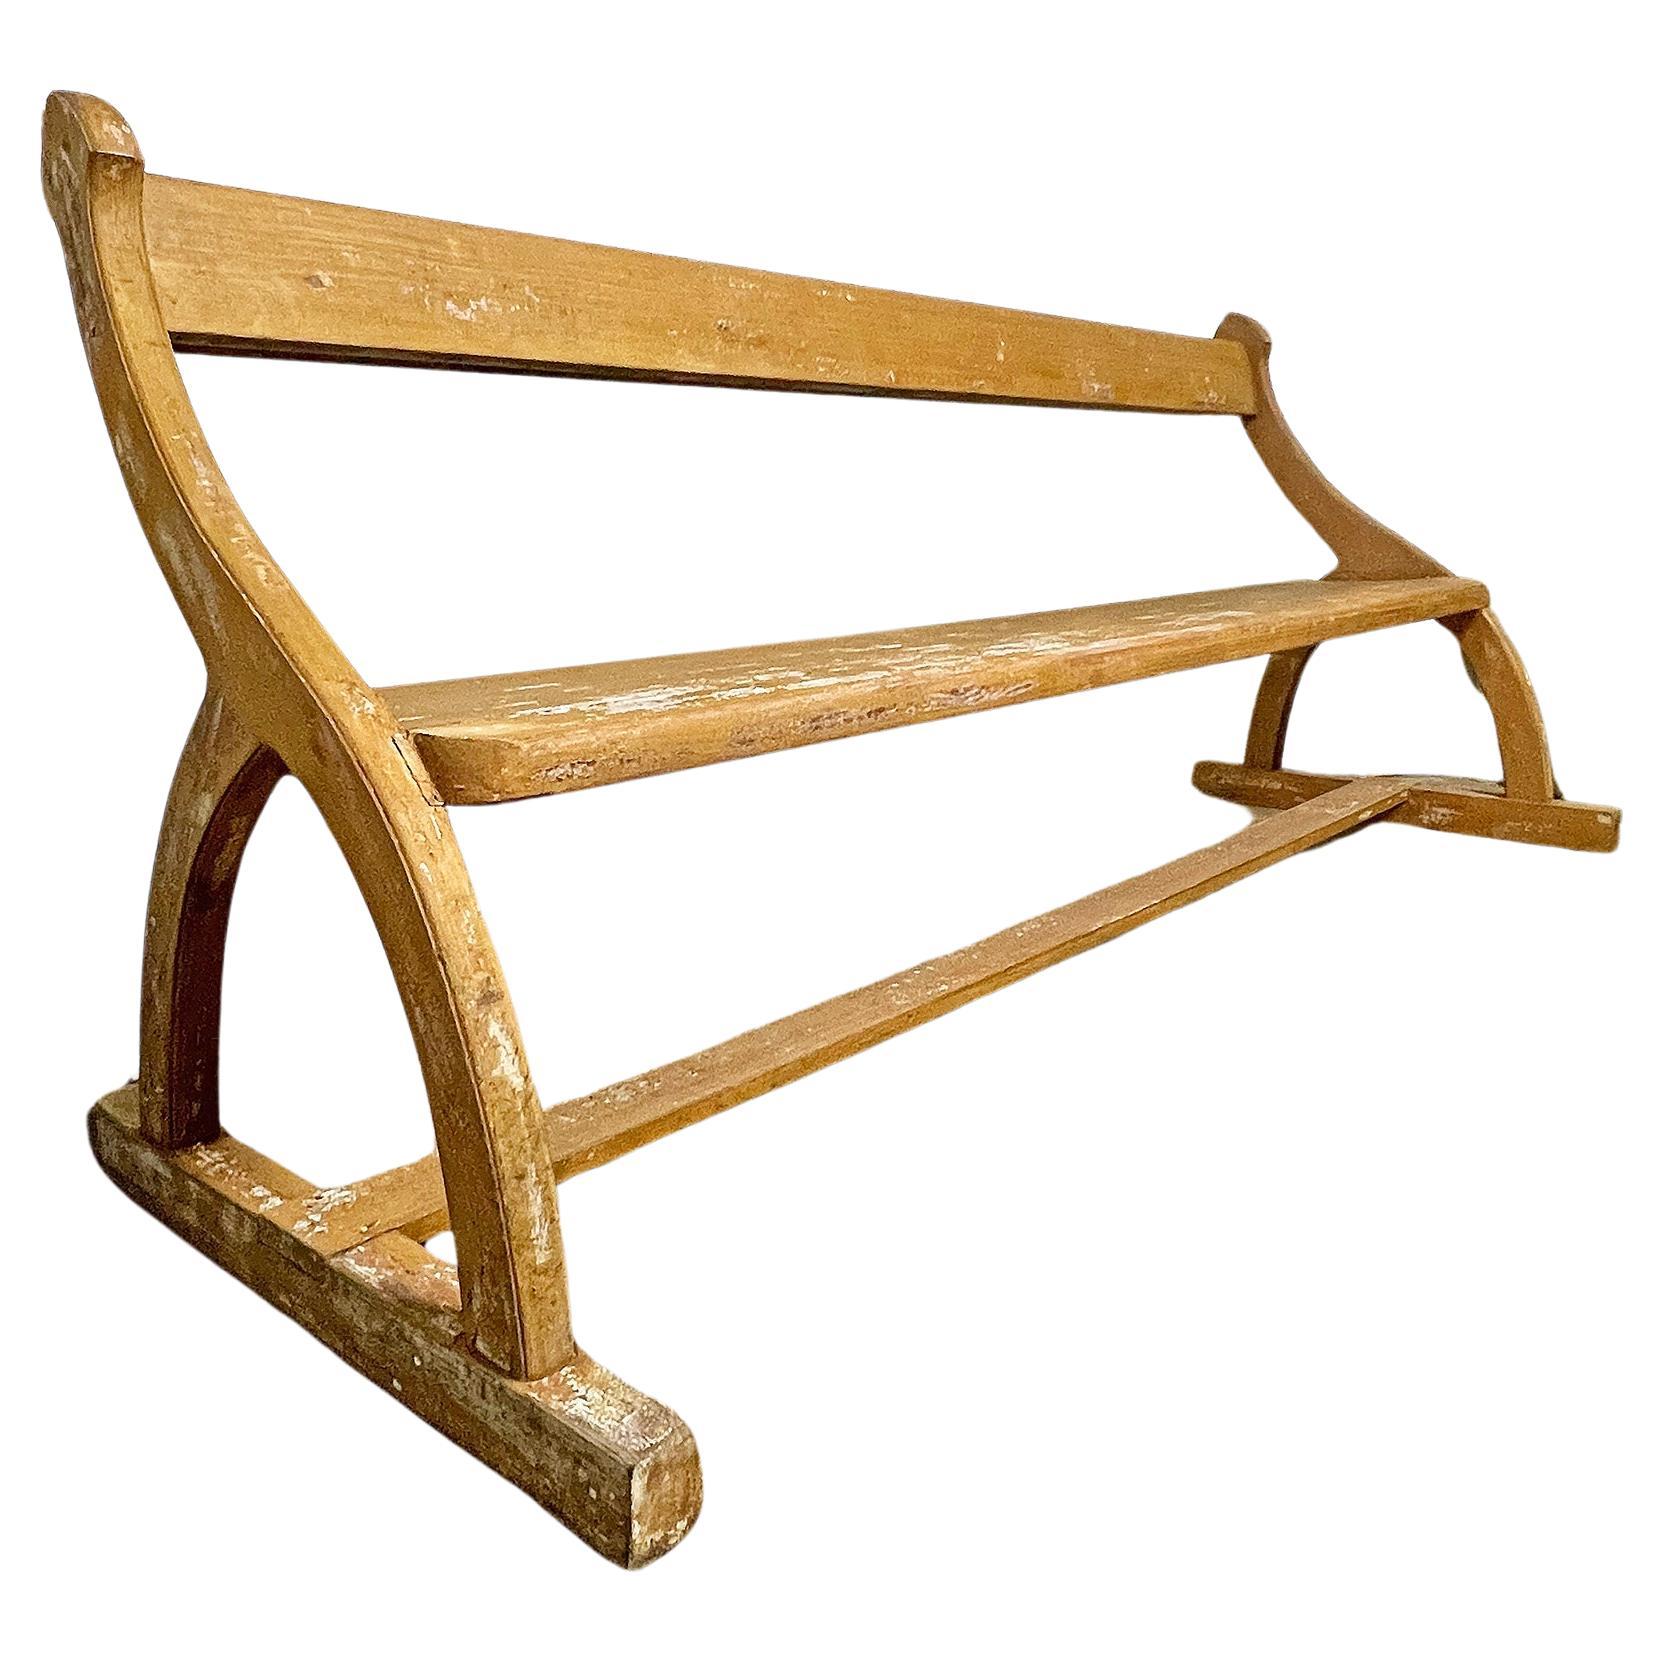 Swedish Bench In Pine, Early 20th century